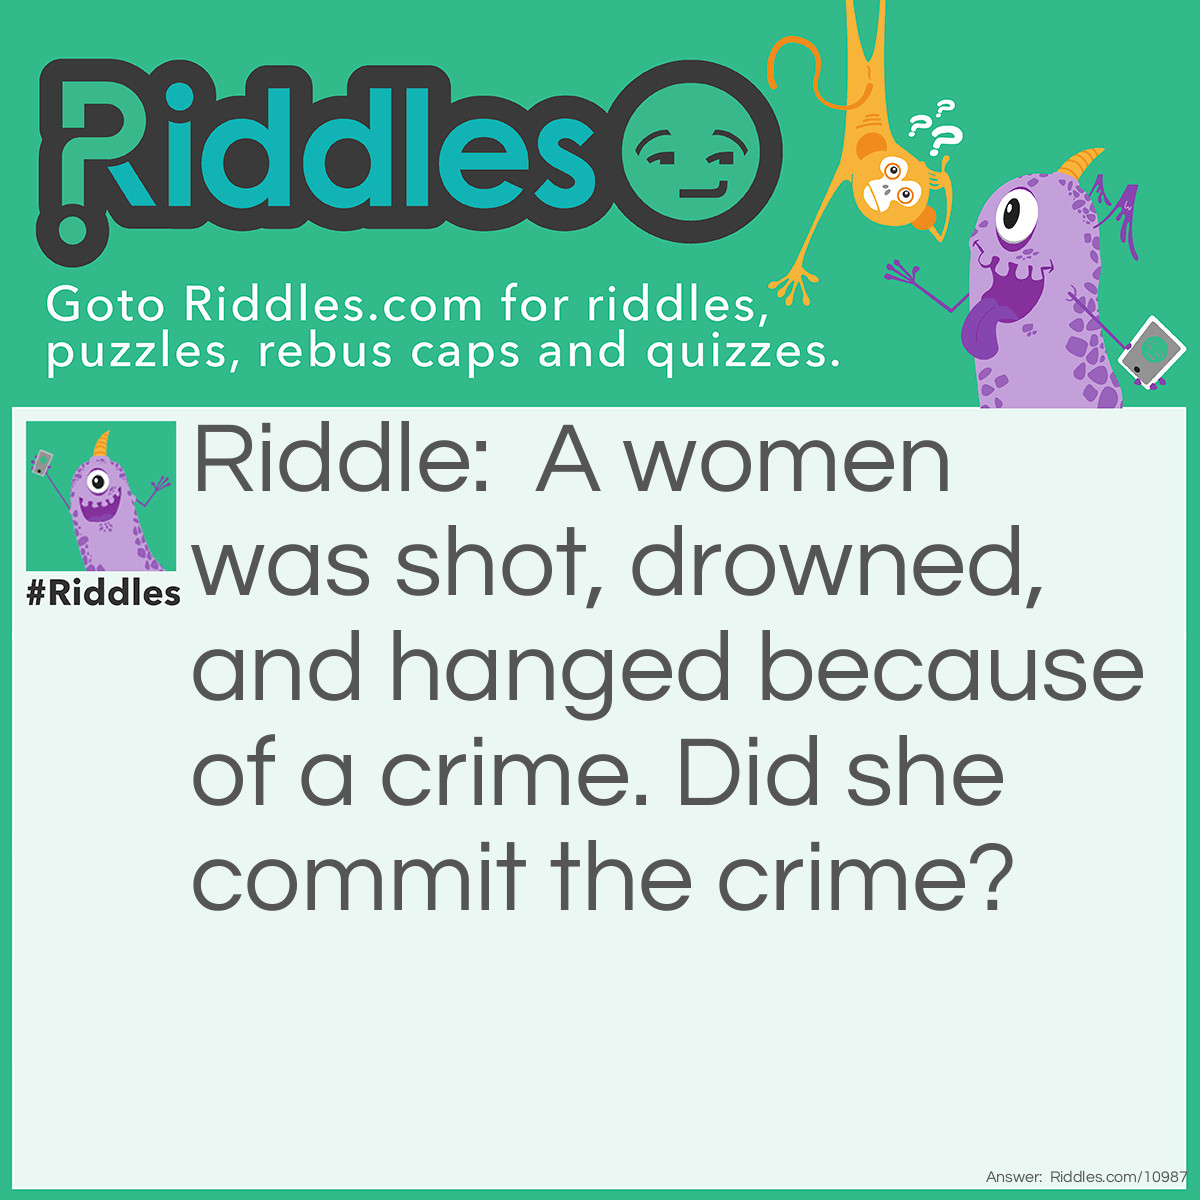 Riddle: A women was shot, drowned, and hanged because of a crime. Did she commit the crime? Answer: No, she was framed. The woman was in a photo